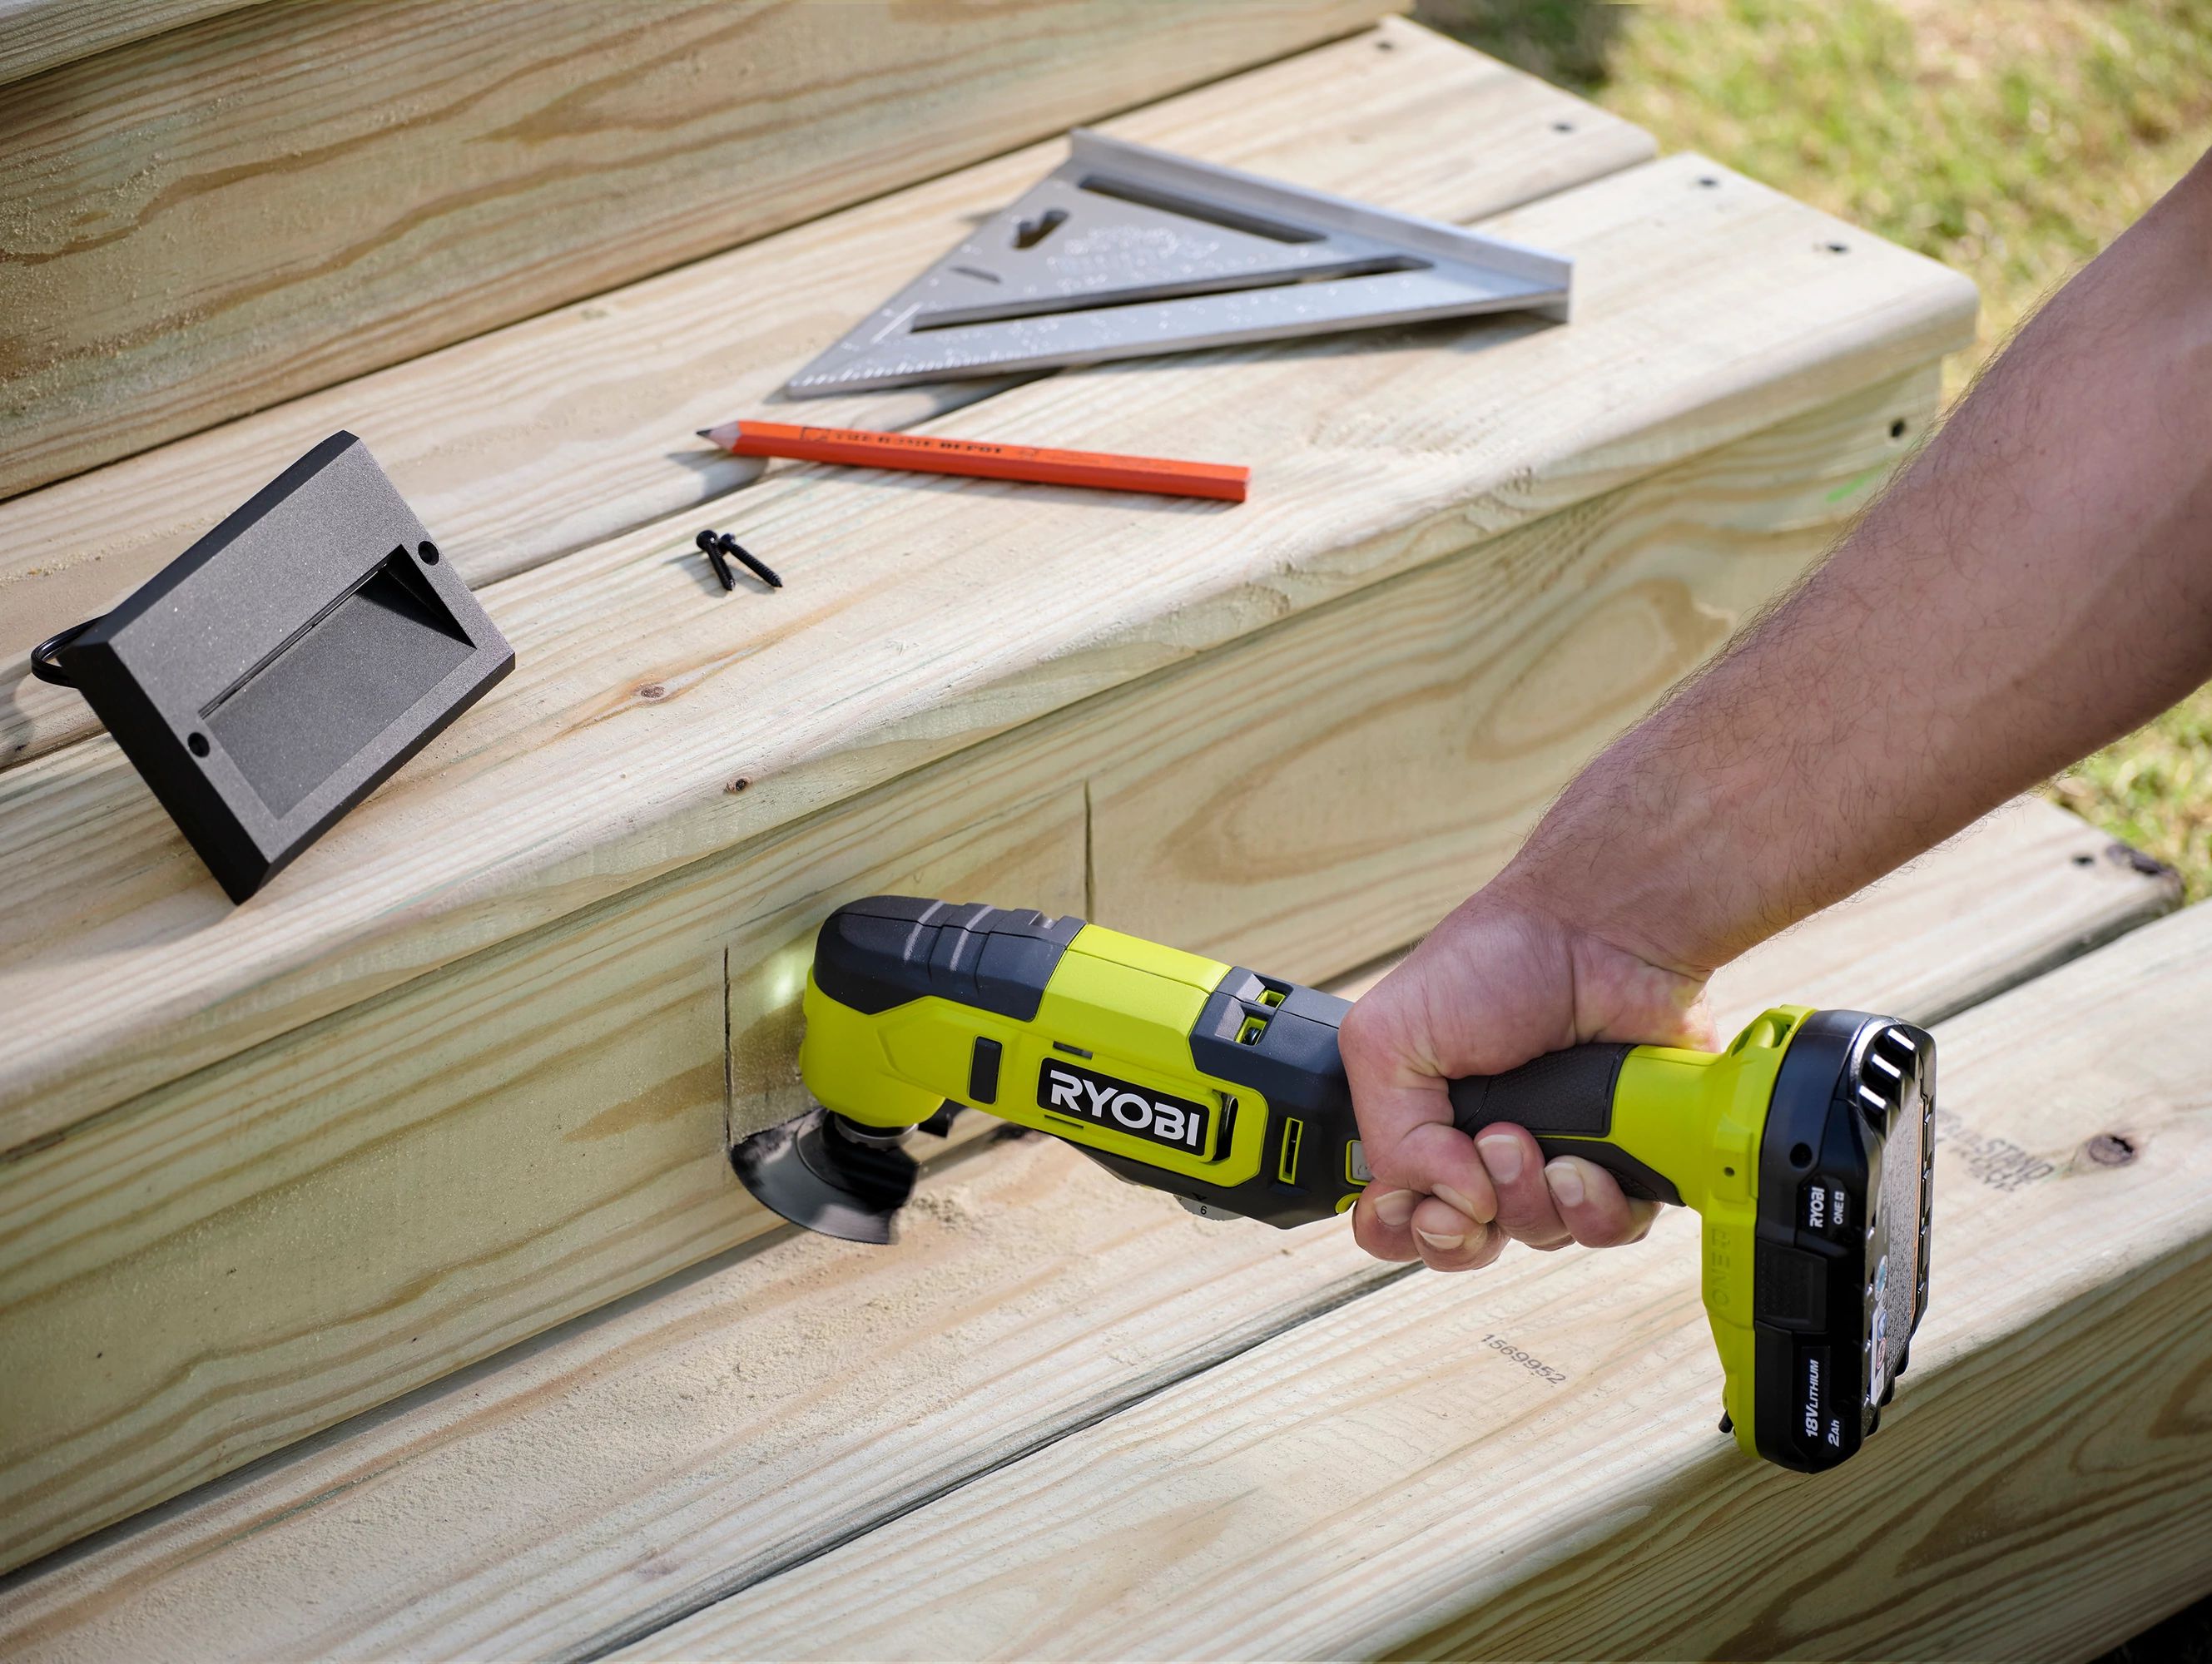 Ryobi 18V One+ Cordless Multi-Tool review: one tool to rule them